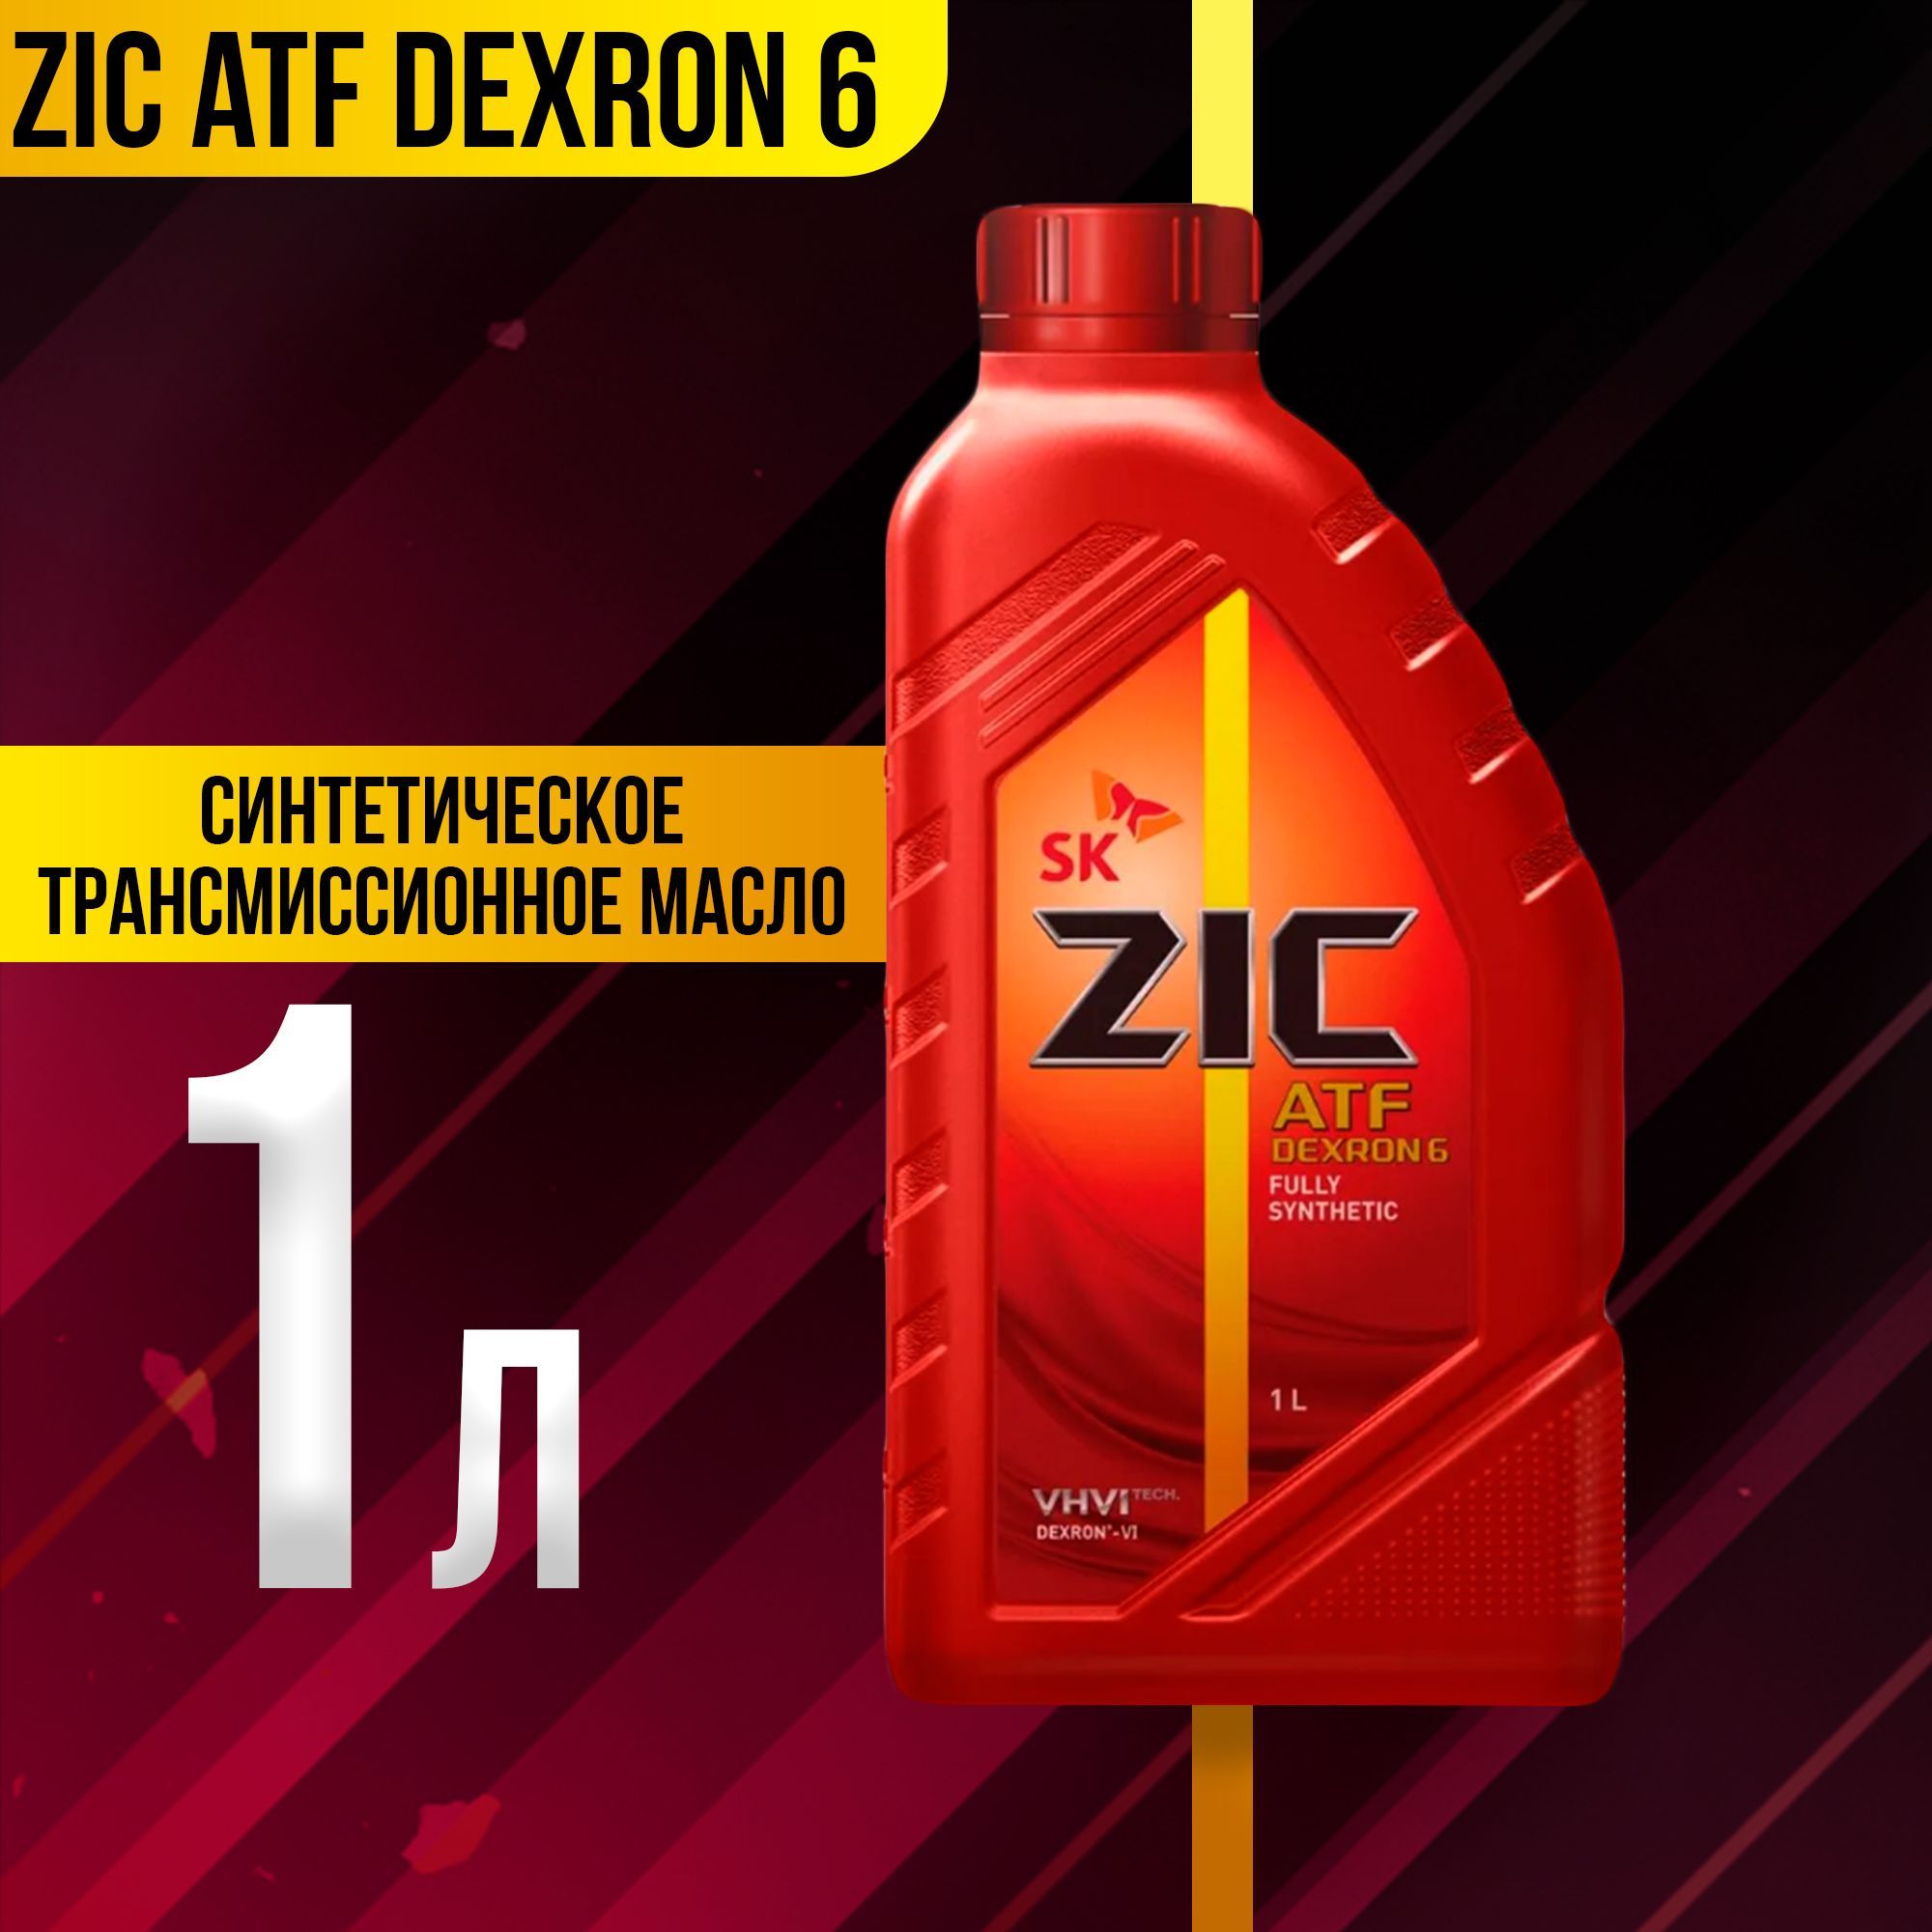 ZIC ATF Multi LF 1л. ZIC ATF Multi HT 1л. ZIC ATF Multi Synthetic. Трансмиссионное масло ZIC ATF SP 4. Трансмиссионное масло atf sp 4